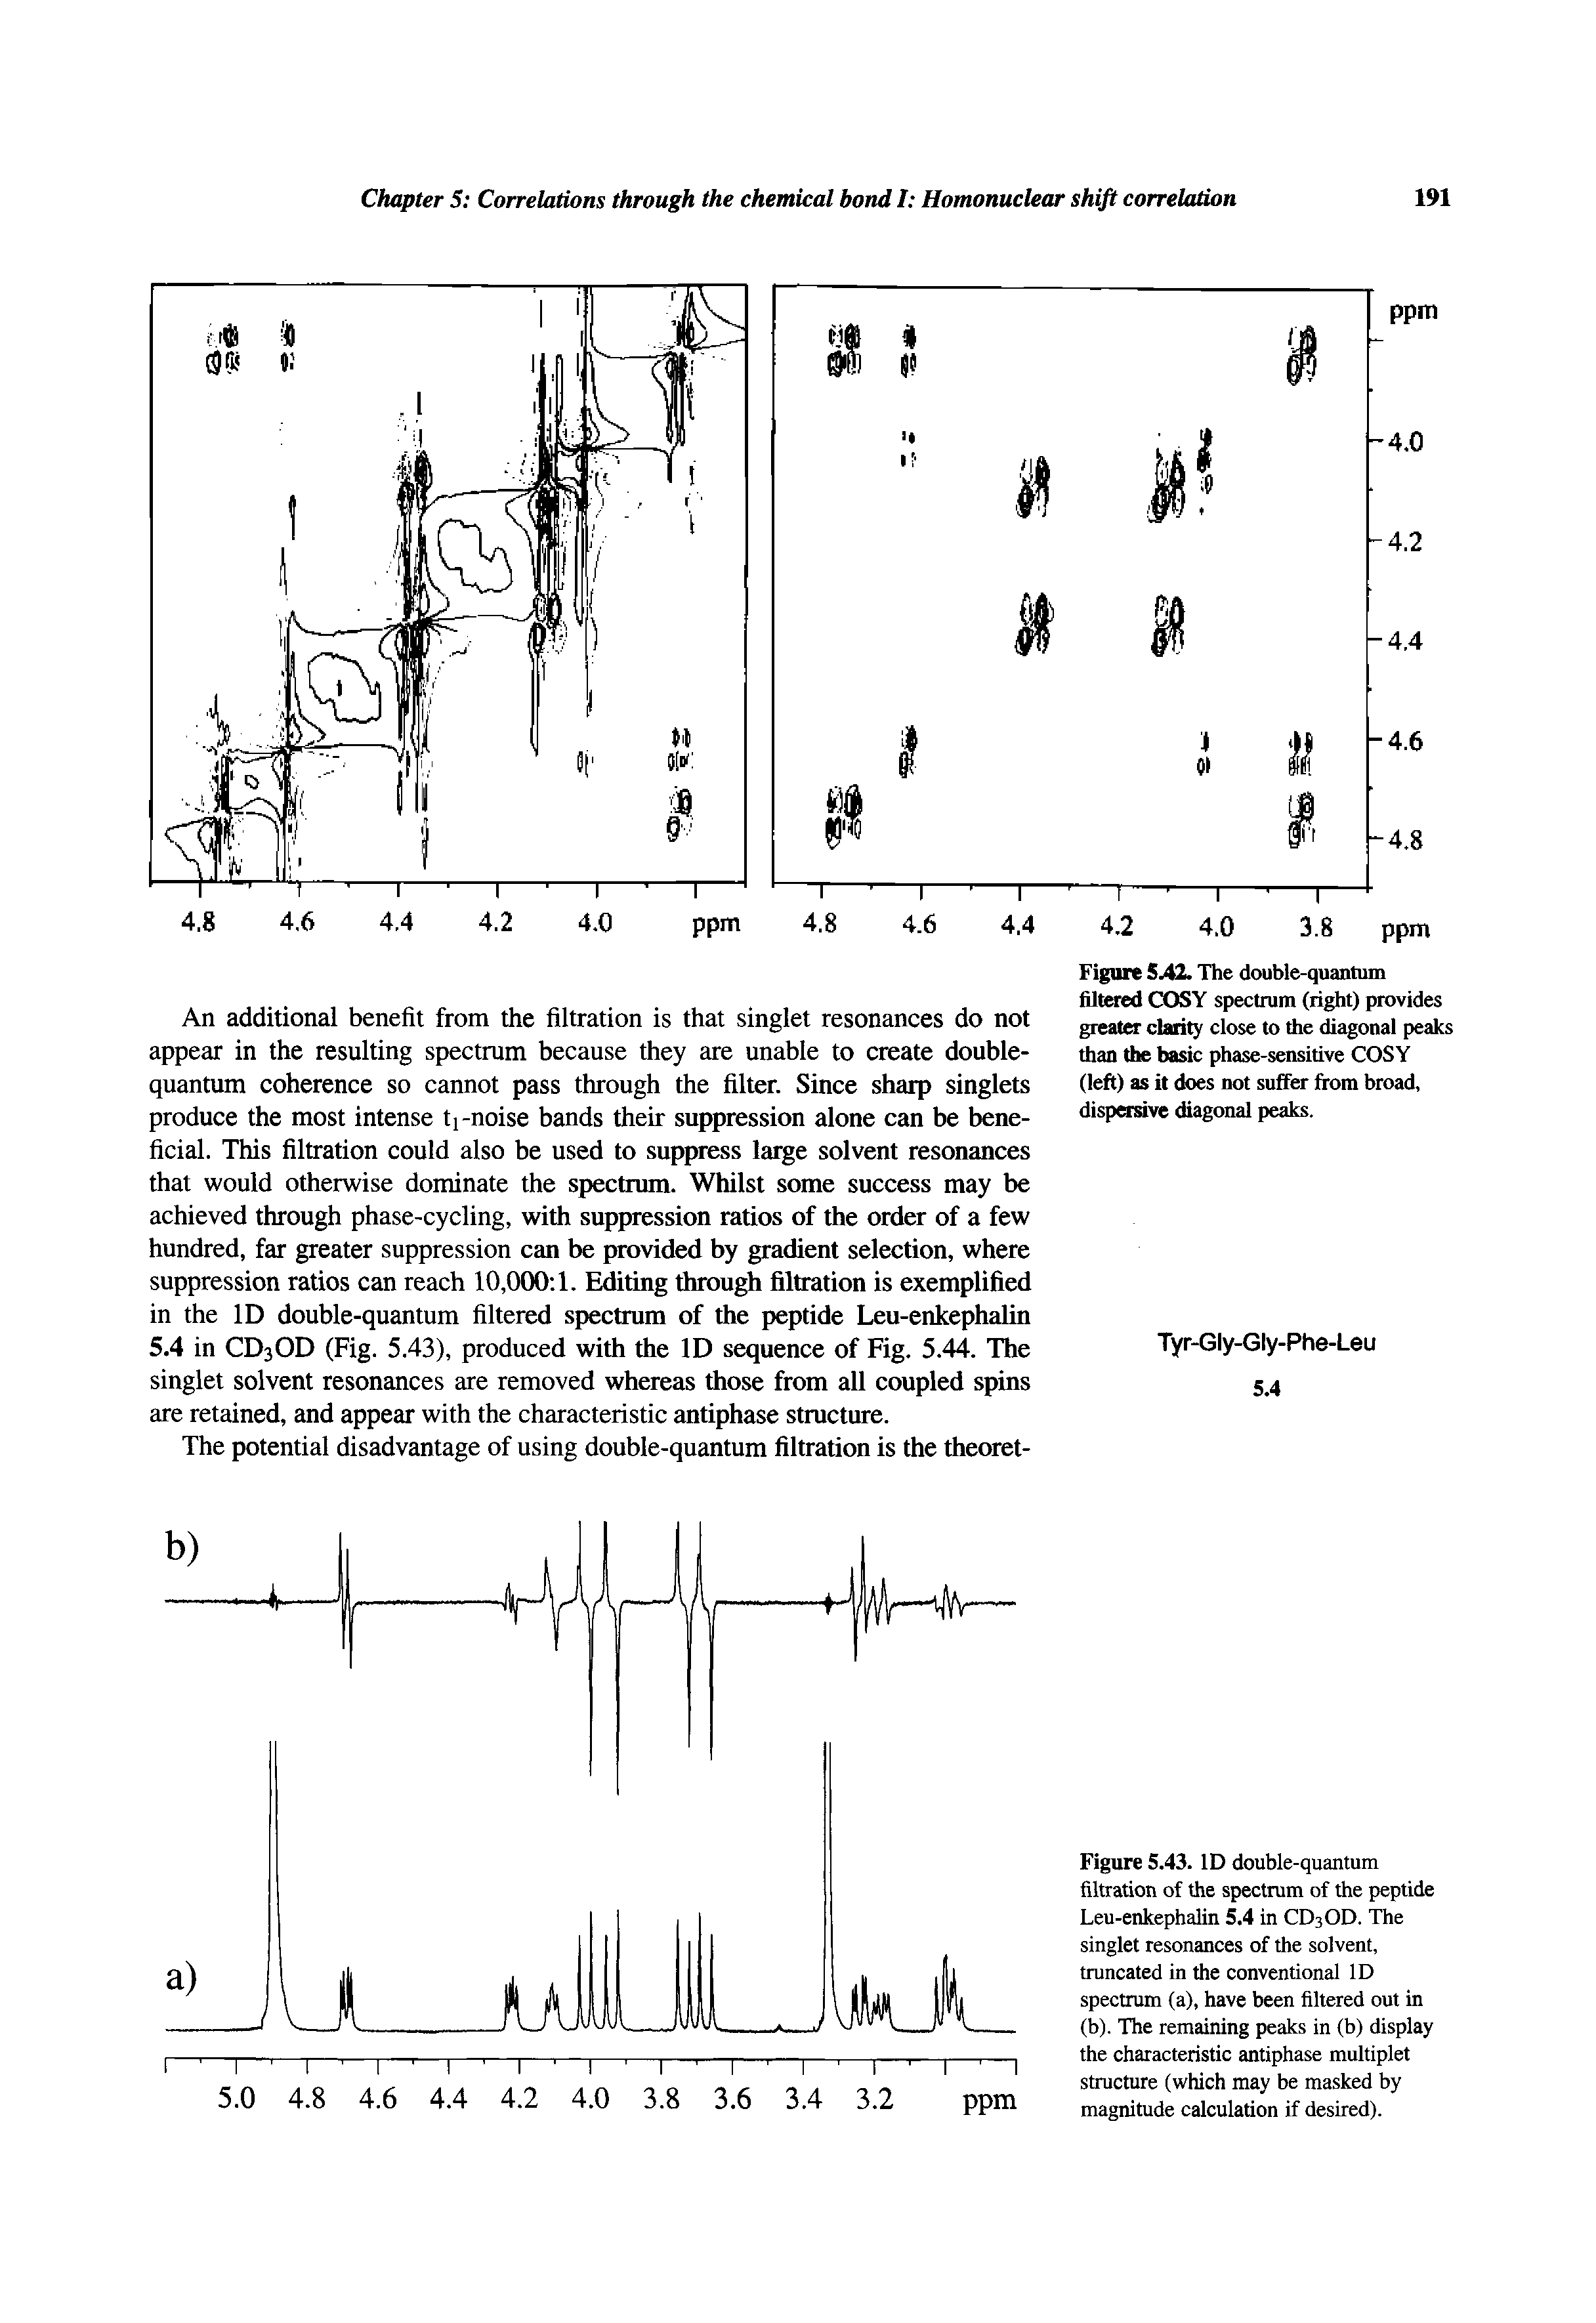 Figure 5.43. ID double-quantum filtration of the spectrum of the peptide Leu-enkephalin 5.4 in CD3OD. The singlet resonances of the solvent, truncated in the conventional ID spectrum (a), have been filtered out in (b). The remaining peaks in (b) display the characteristic antiphase multiplet structure (which may be masked by magnitude calculation if desired).